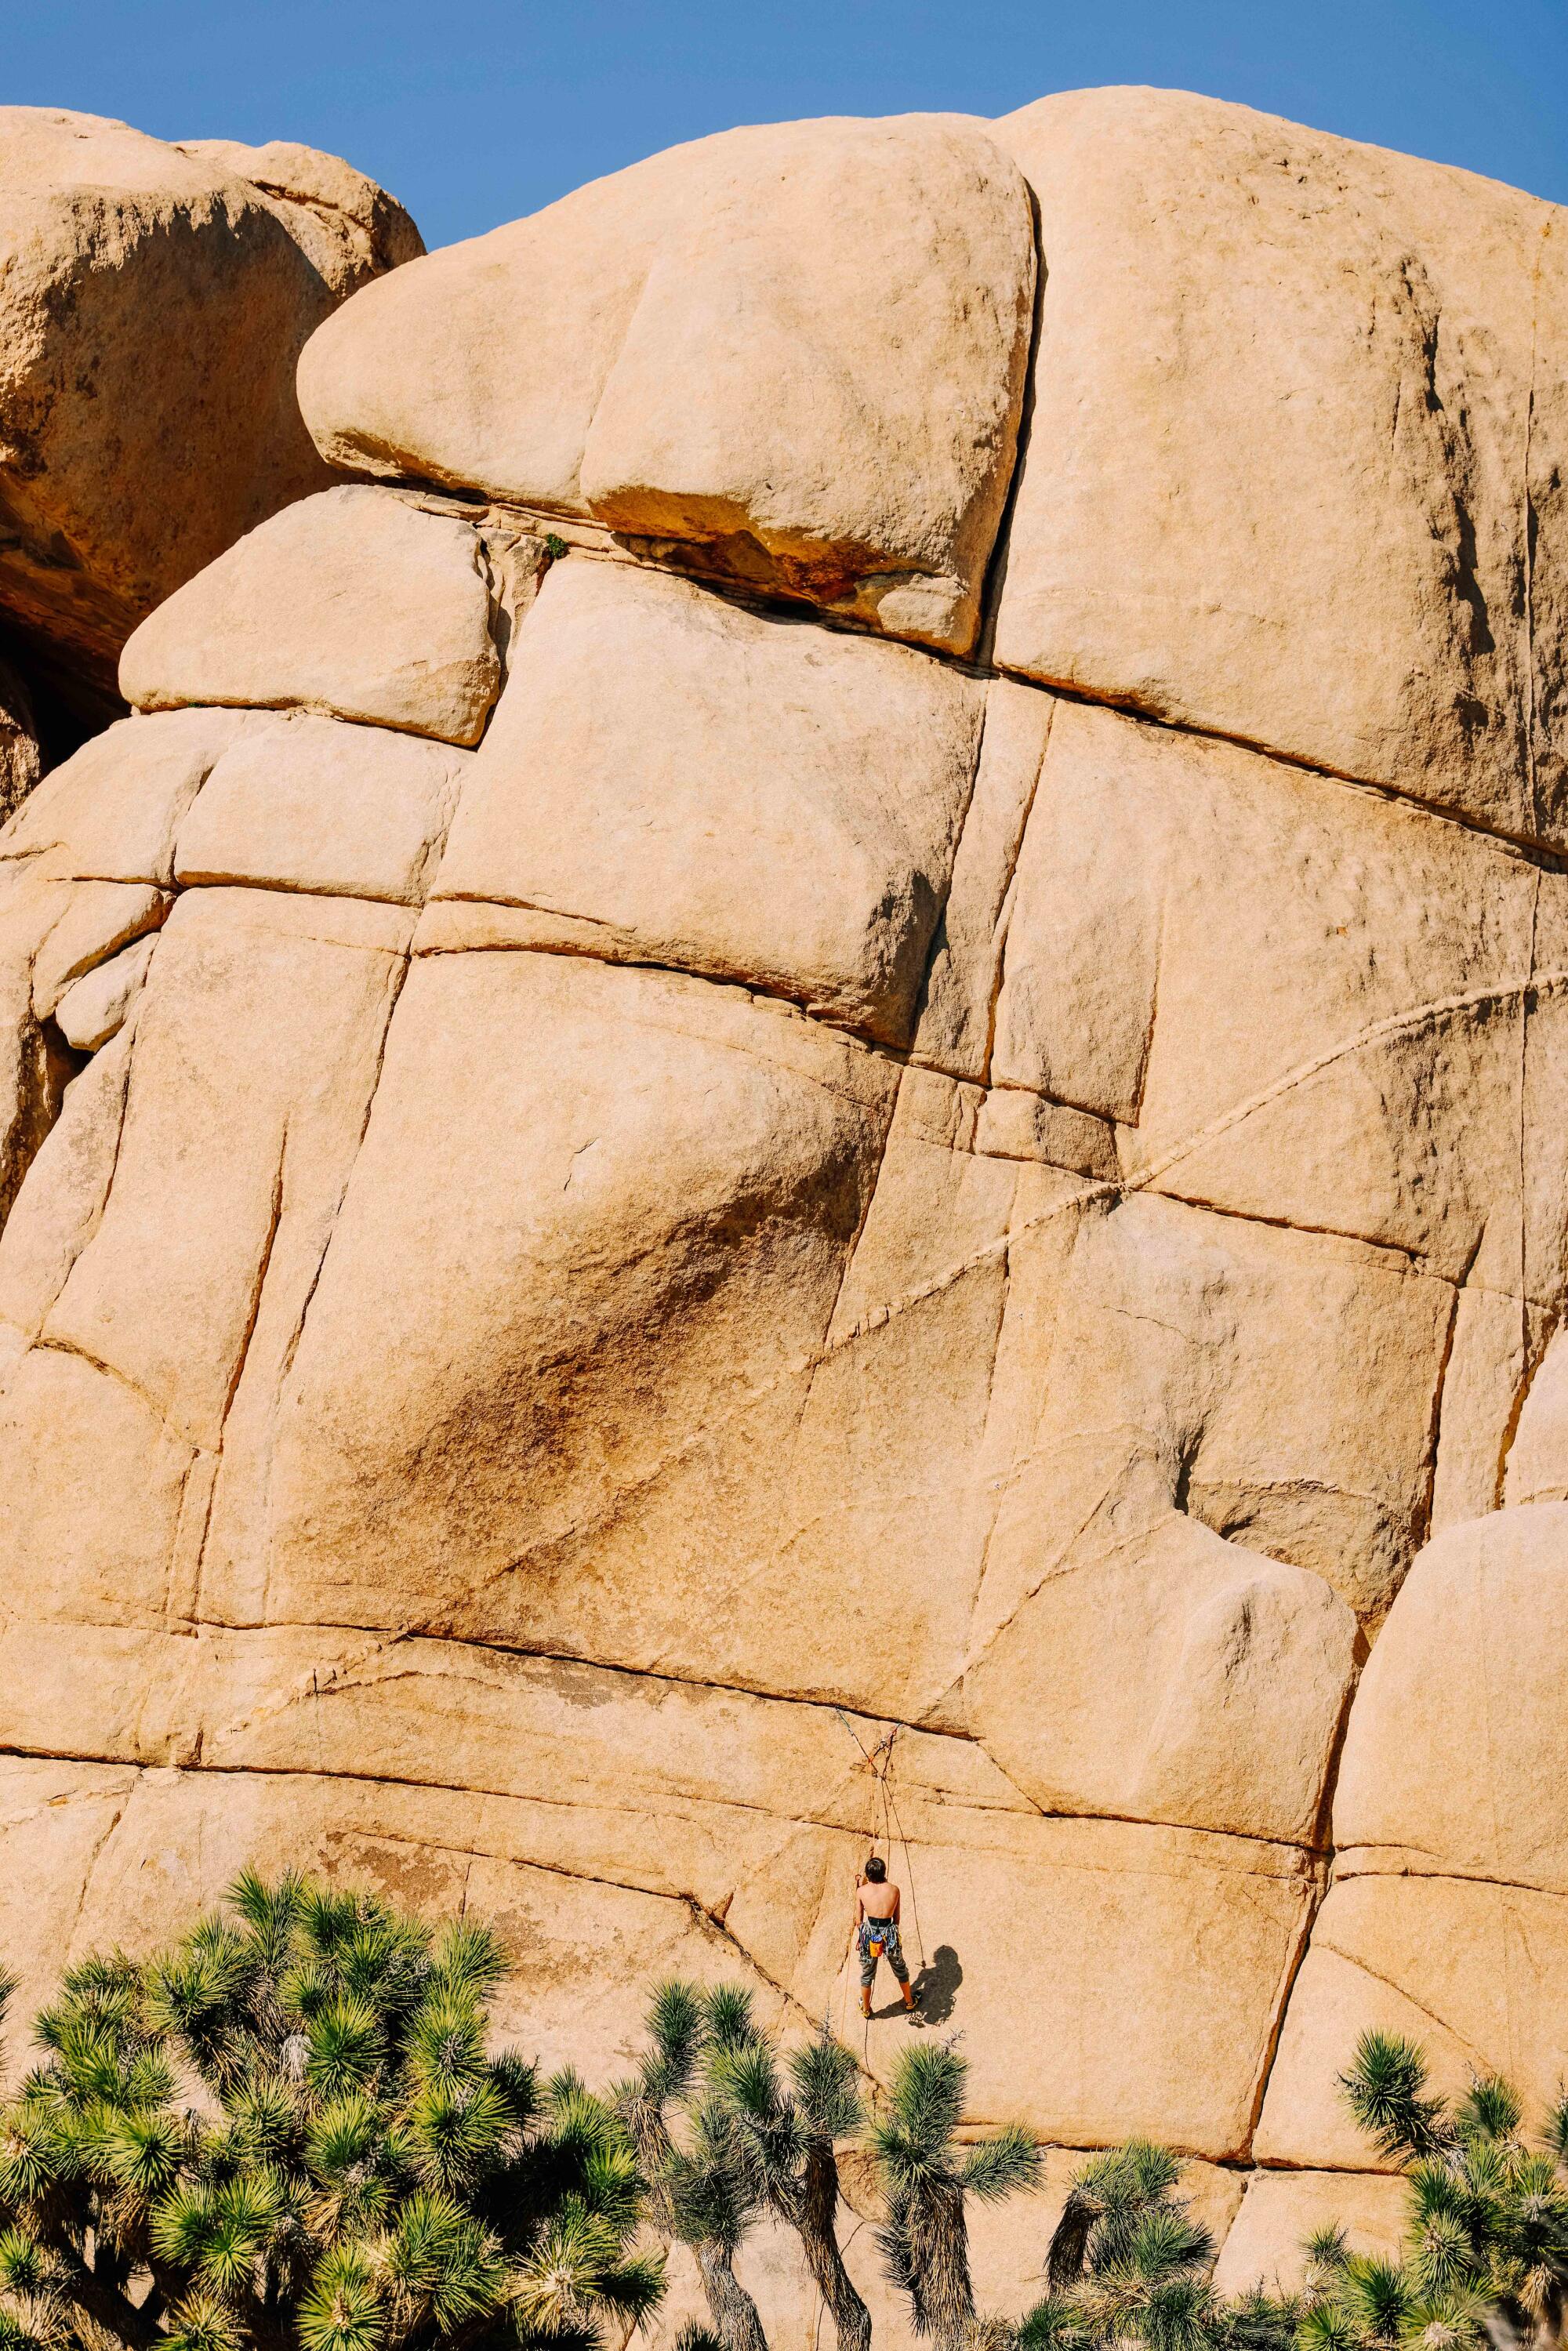 A rock climber is seen at the Hidden Valley campground inside Joshua Tree National Park.